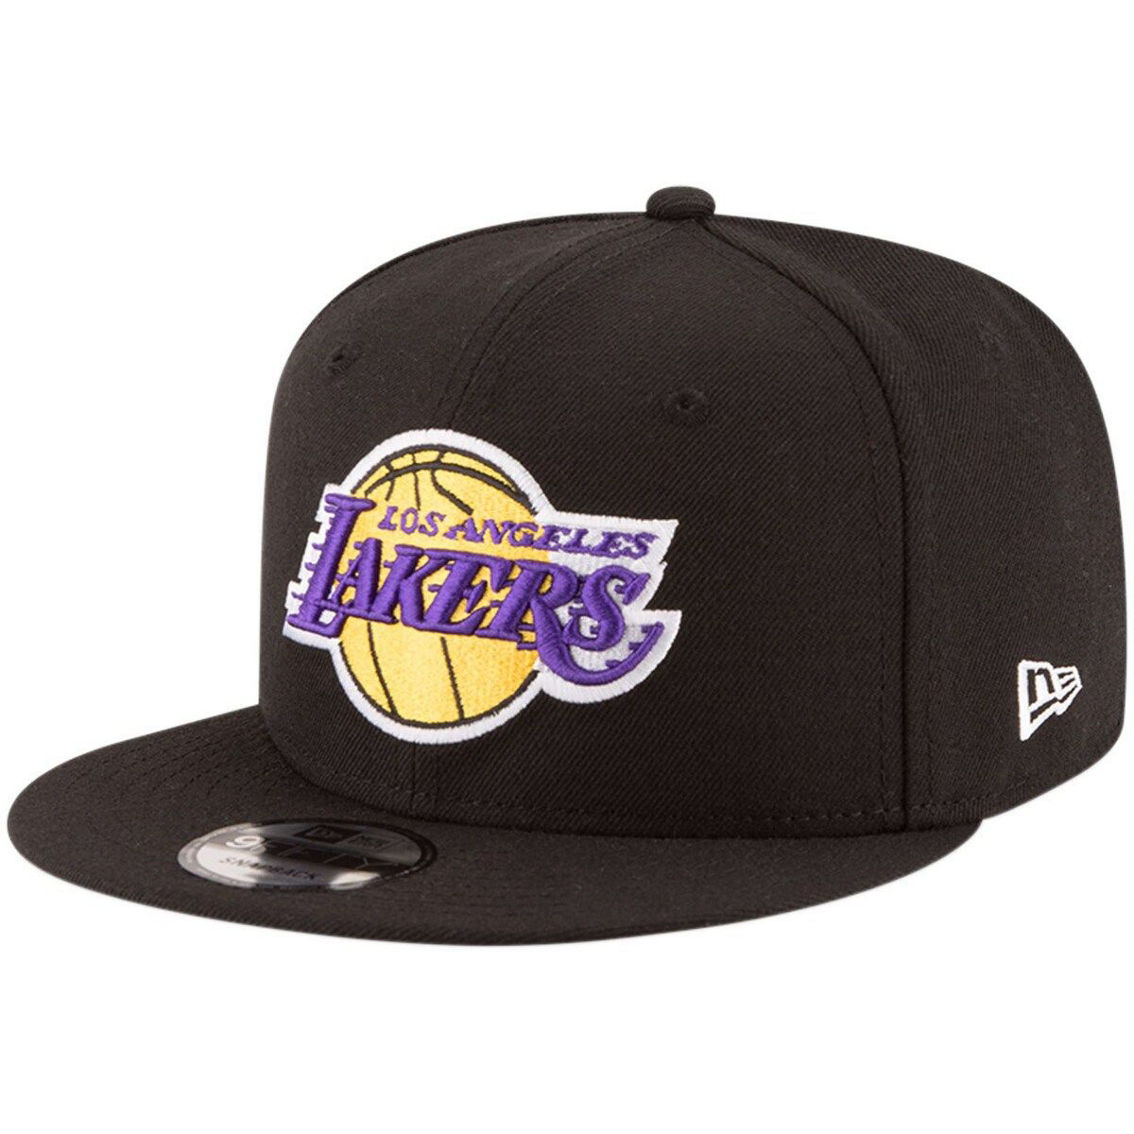 New Era Men's Black Los Angeles Lakers Official Team Color 9FIFTY Snapback Hat - Image 2 of 4